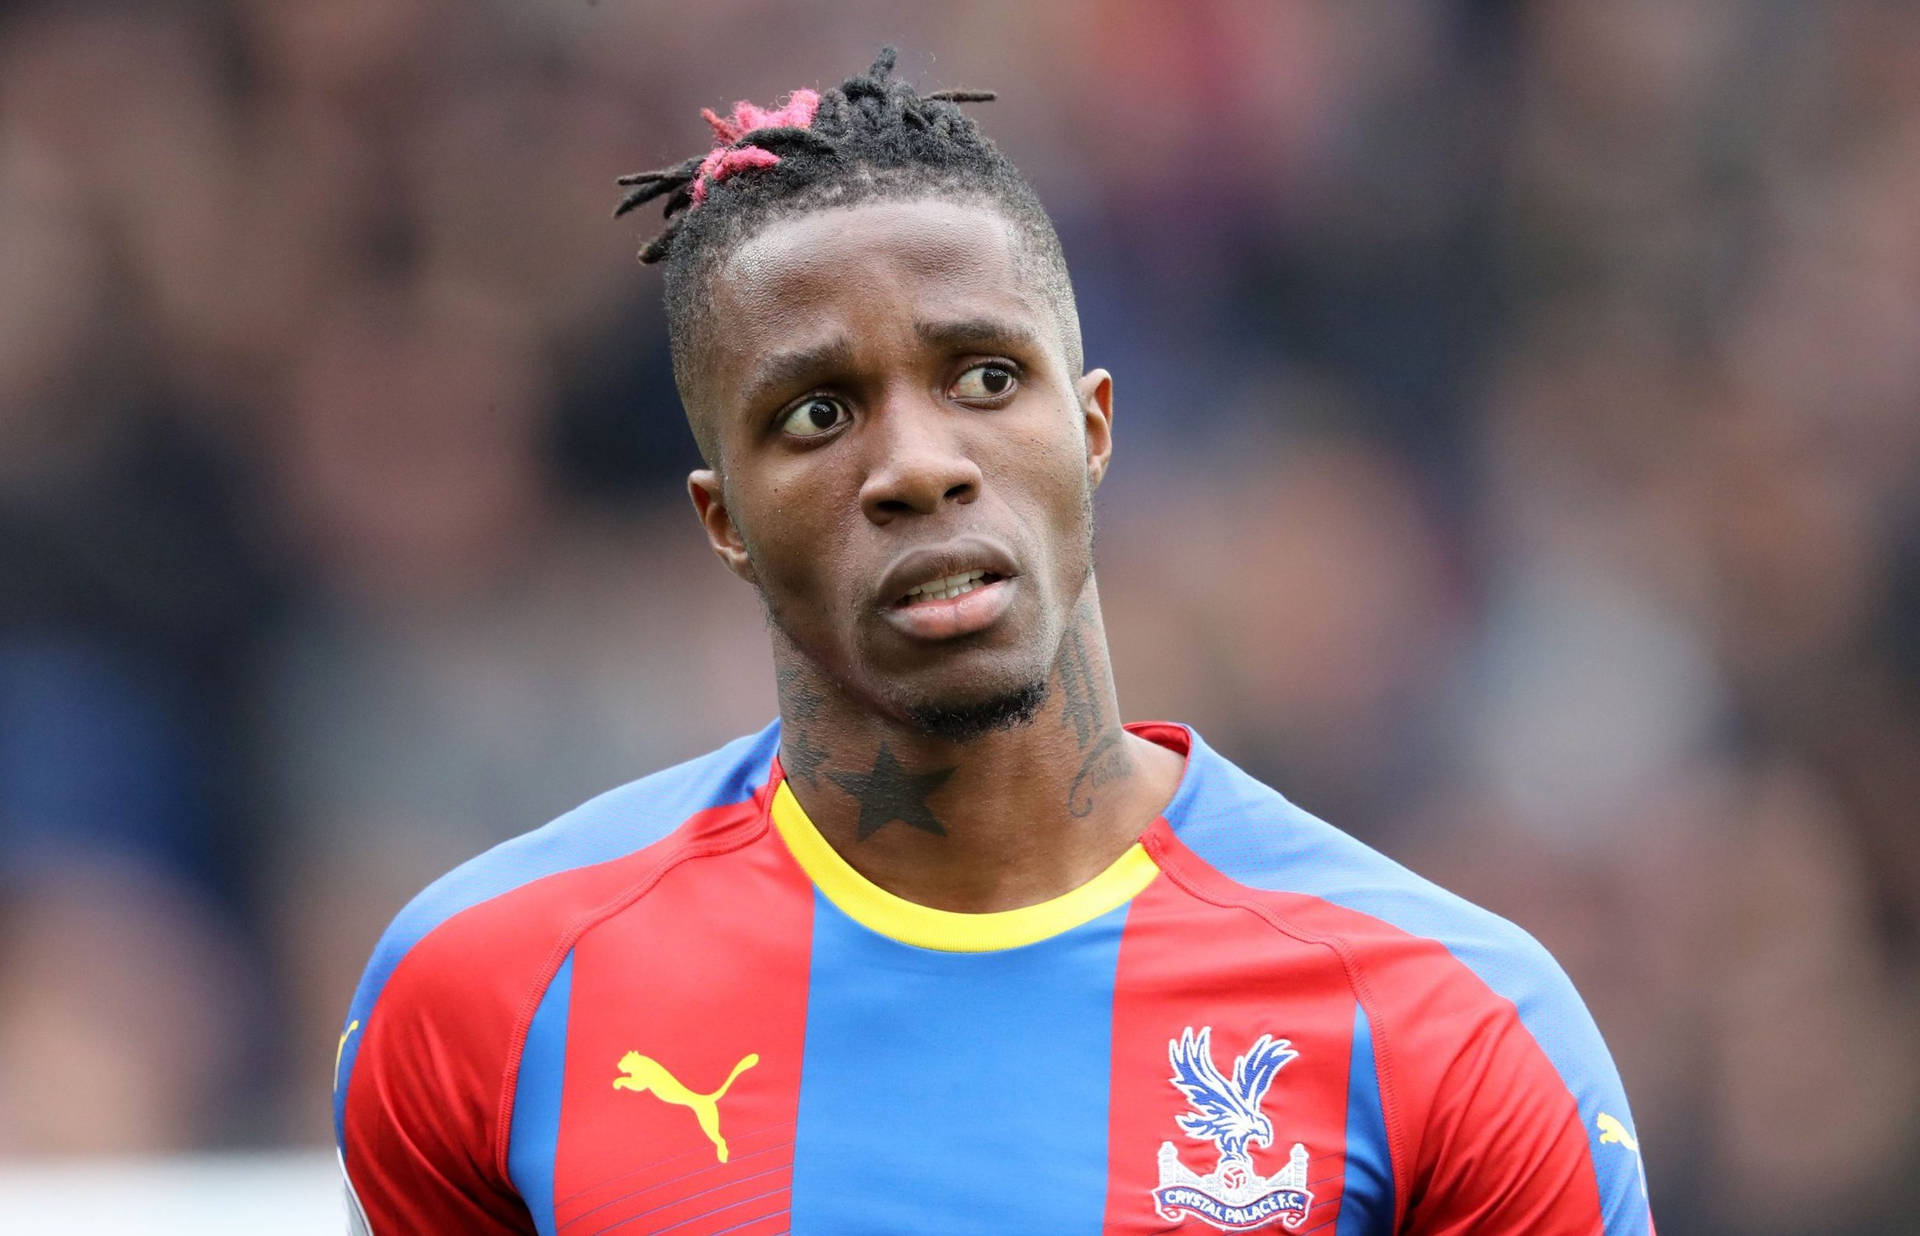 Wilfried Zaha With Pink In Hair Wallpaper